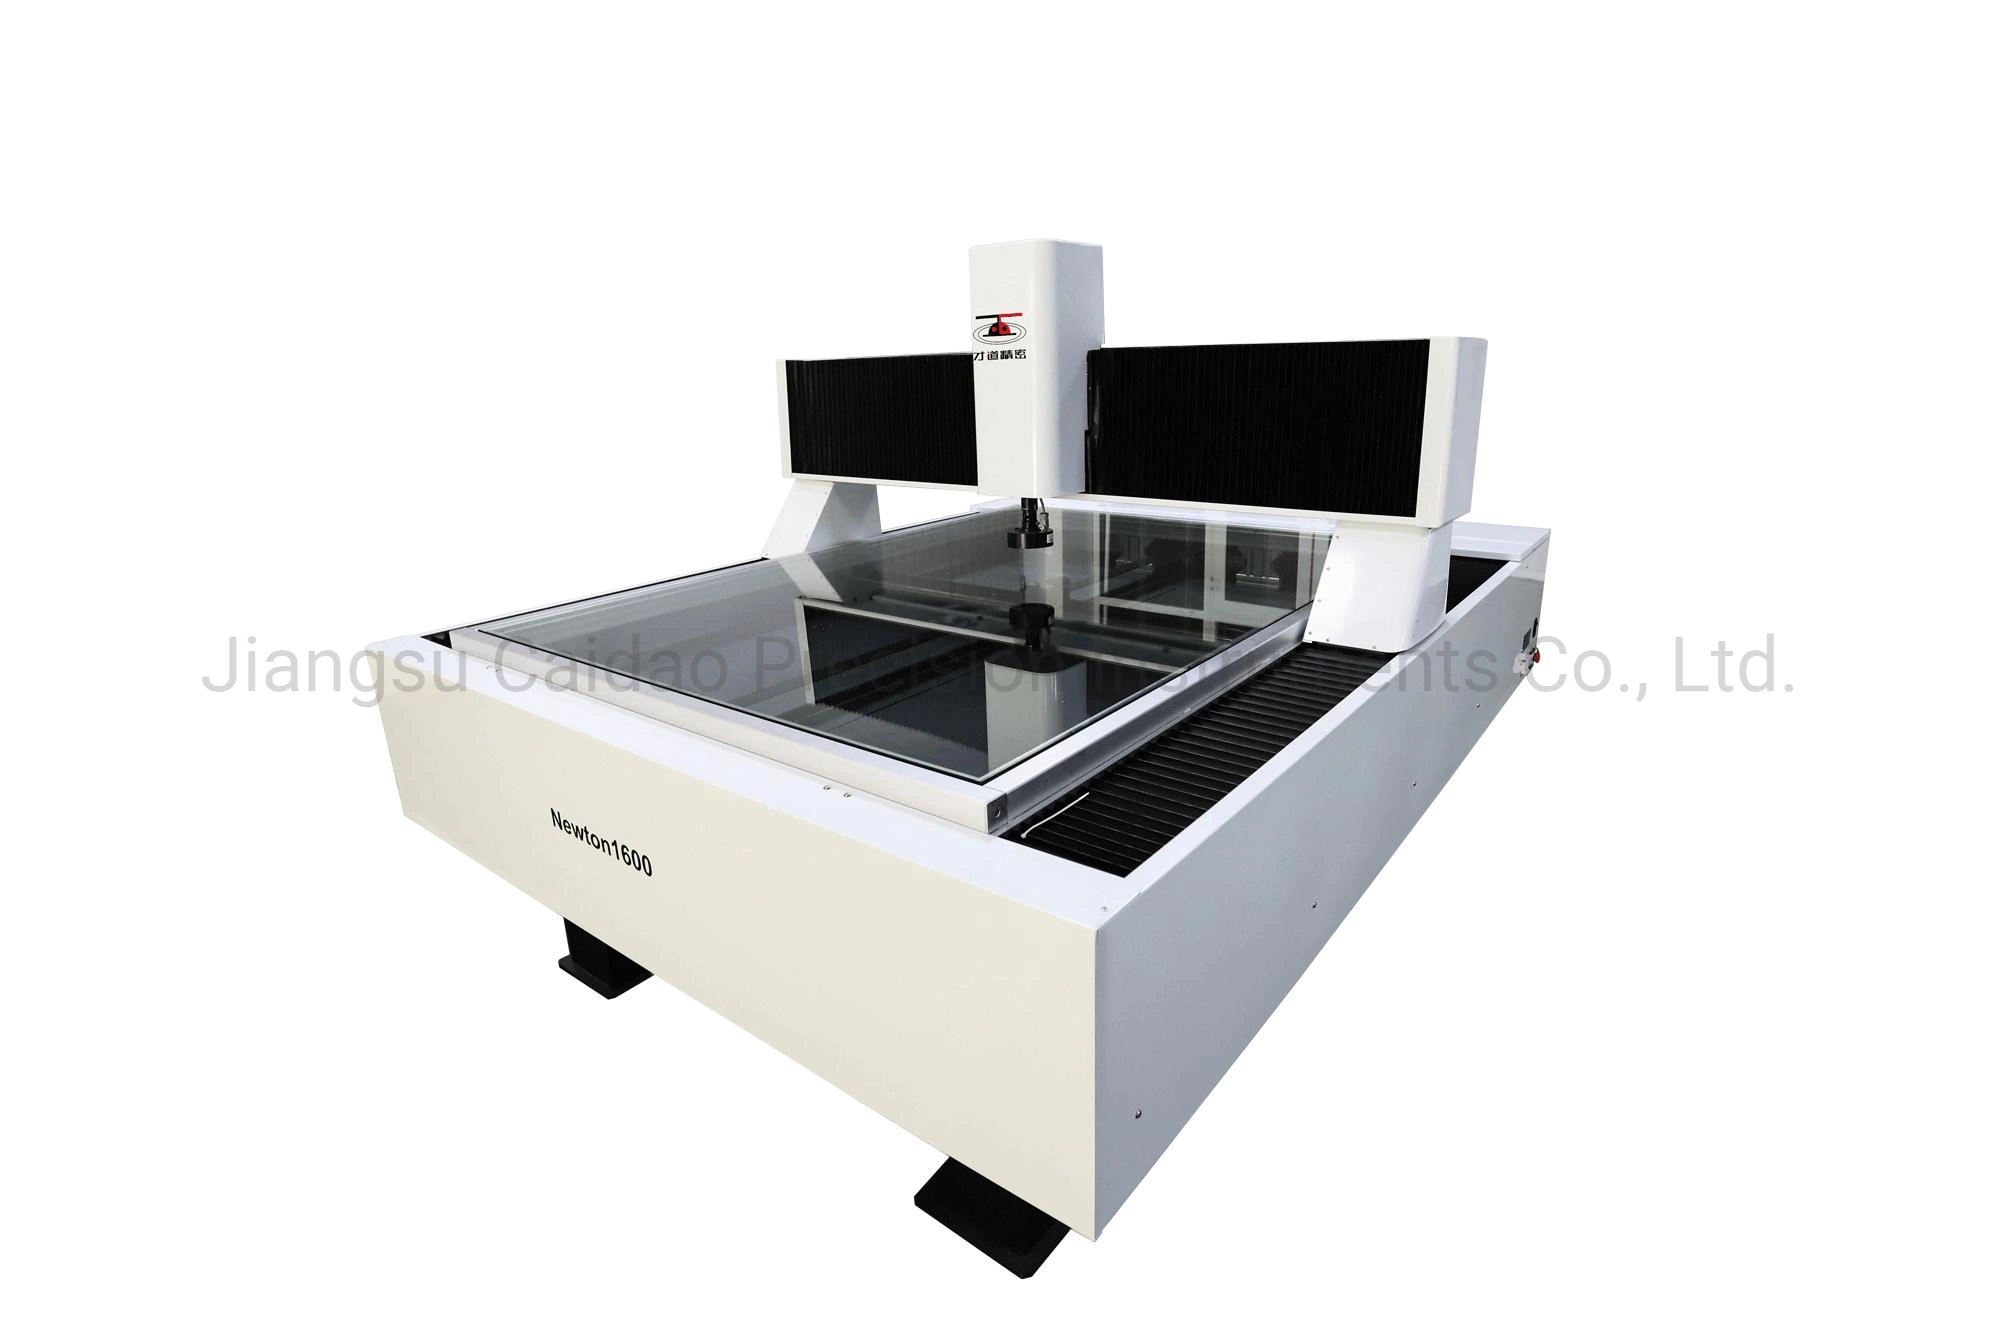 Video Measuring System for Medical Bone Nail Inspection Newton 1500